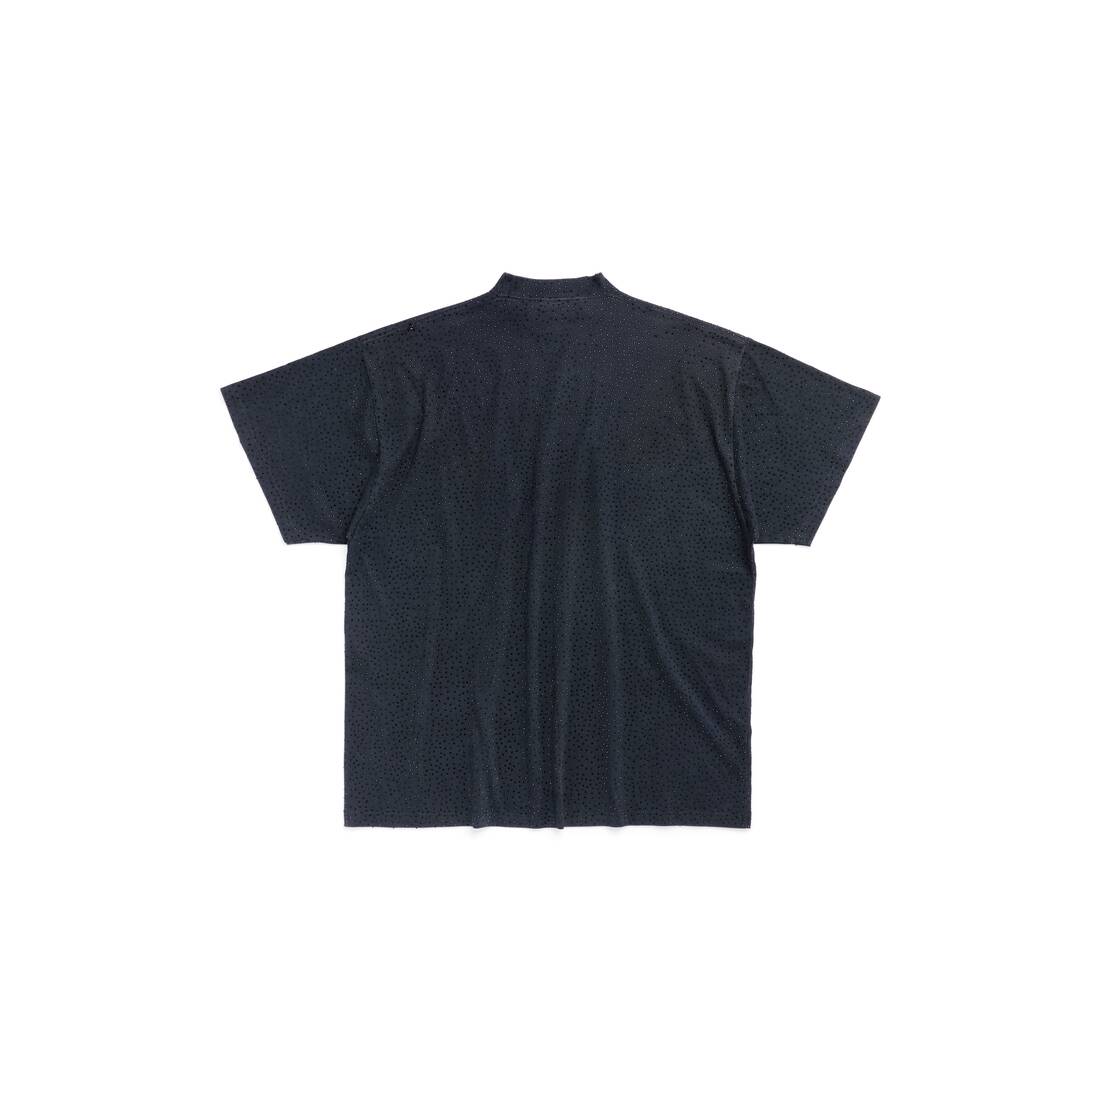 T-shirt Oversized in Black Faded